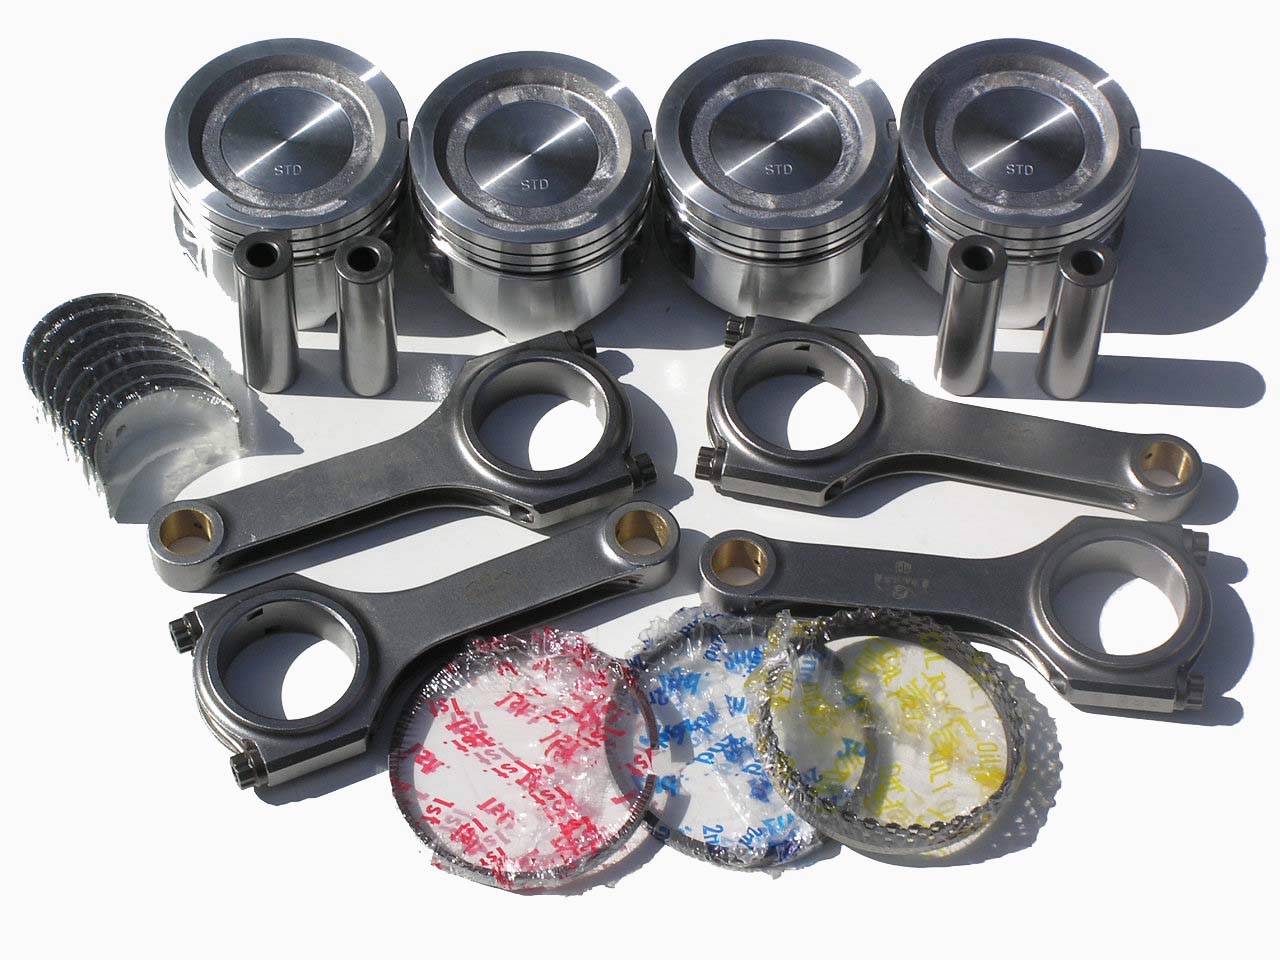 Toyota 22 re forged pistons